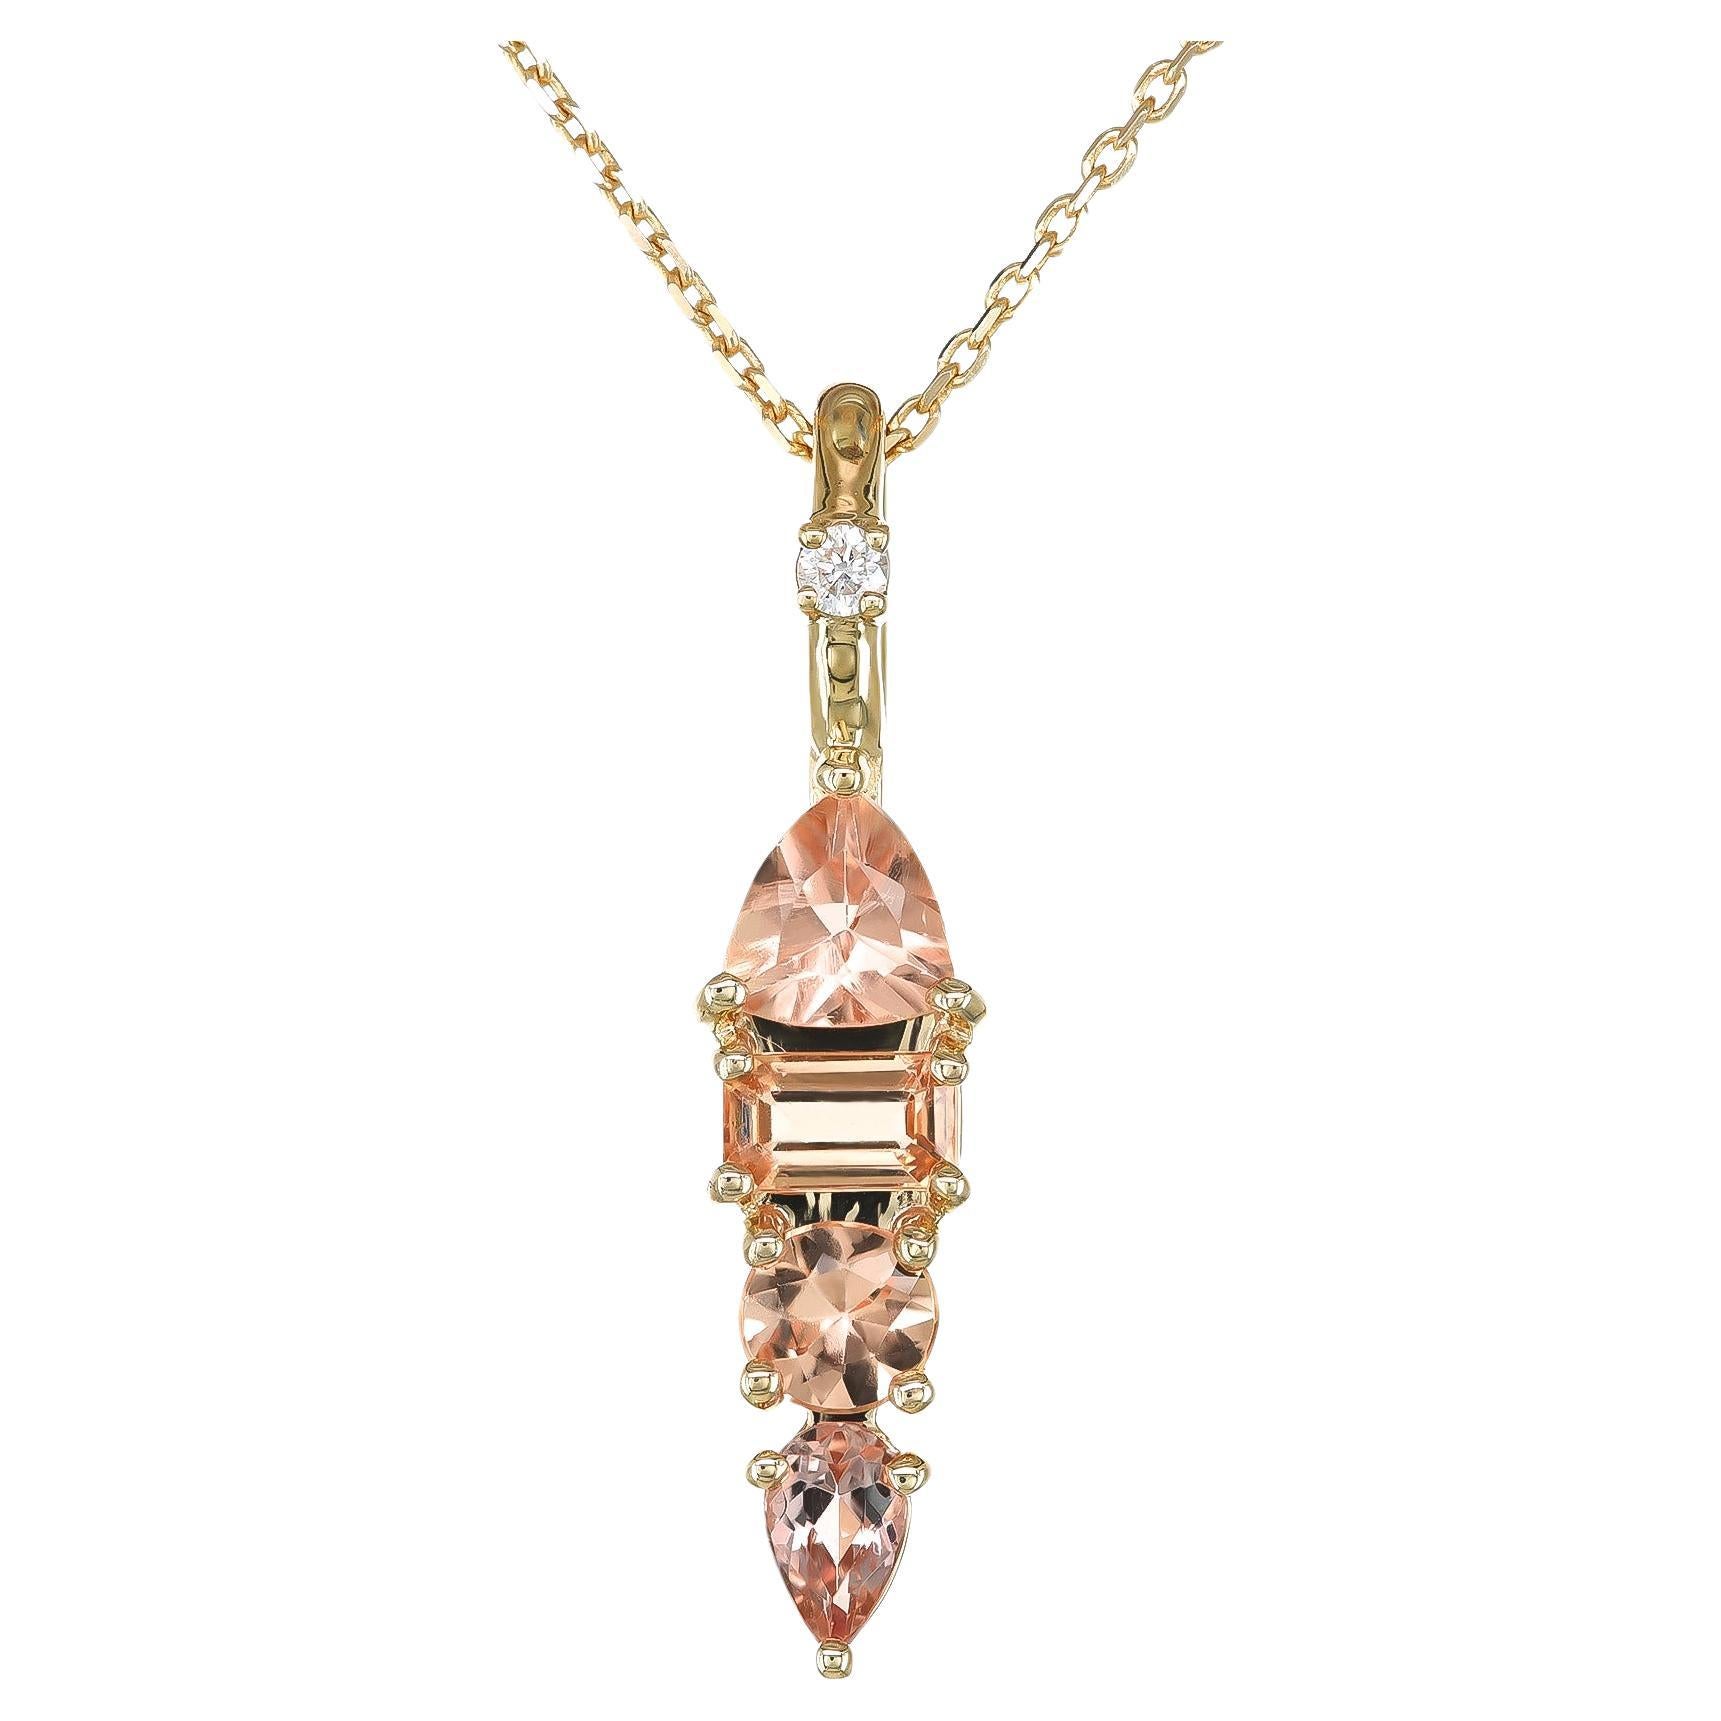 Pendant with 1.24 carats Imperial Topaz Diamonds set in 14K Yellow Gold For Sale